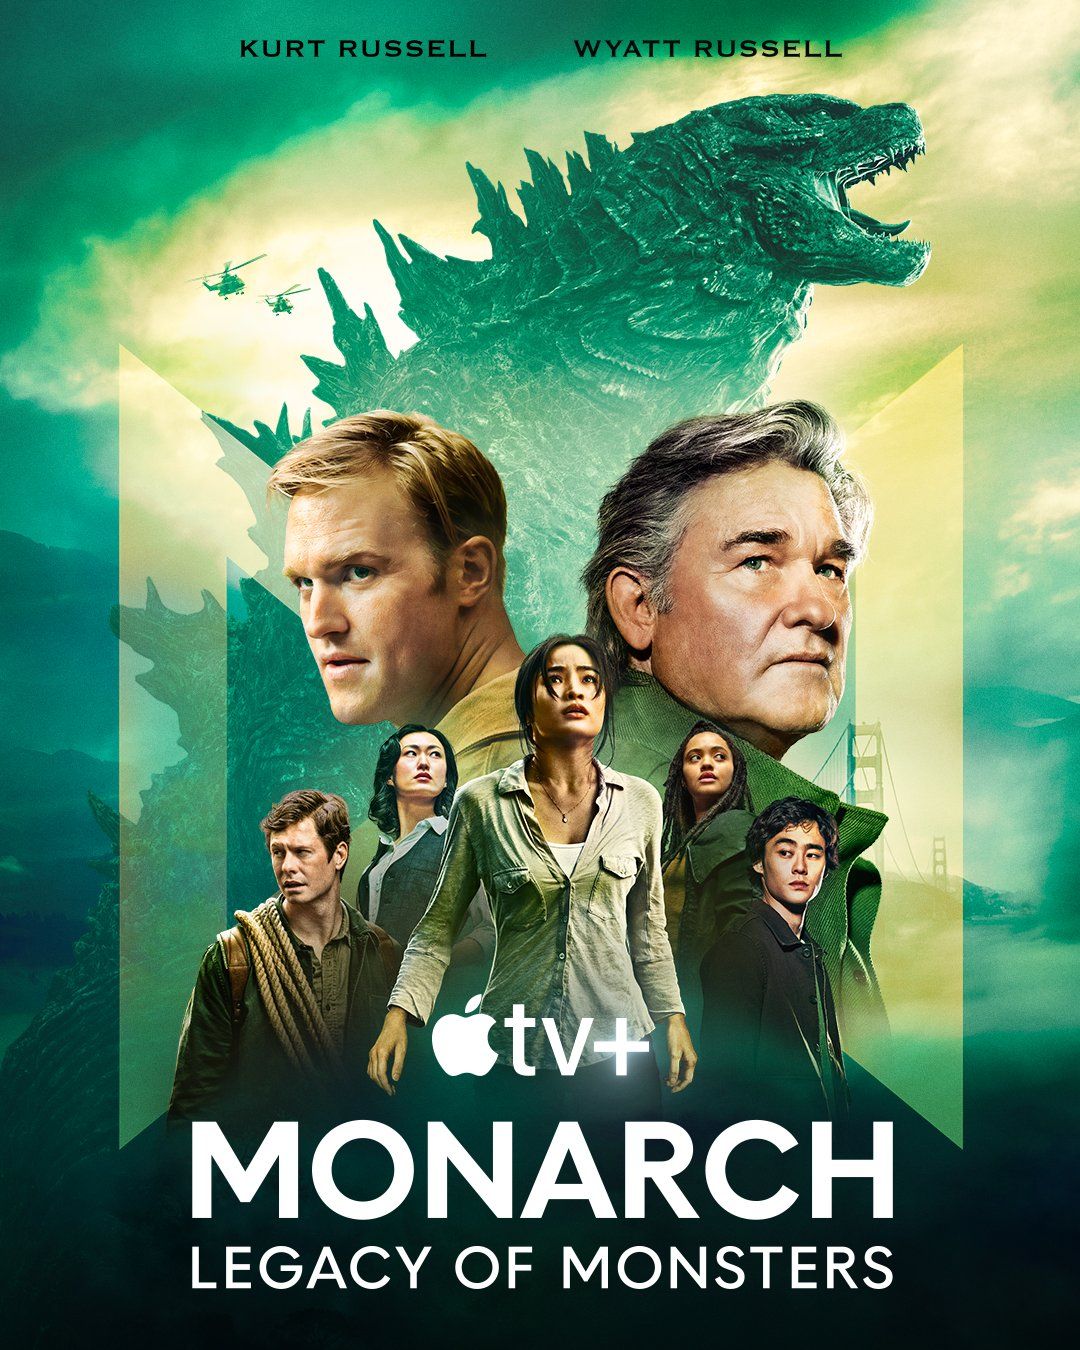 Monarch: Legacy Of Monsters Poster Puts Kurt & Wyatt Russell’s Character Side-By-Side